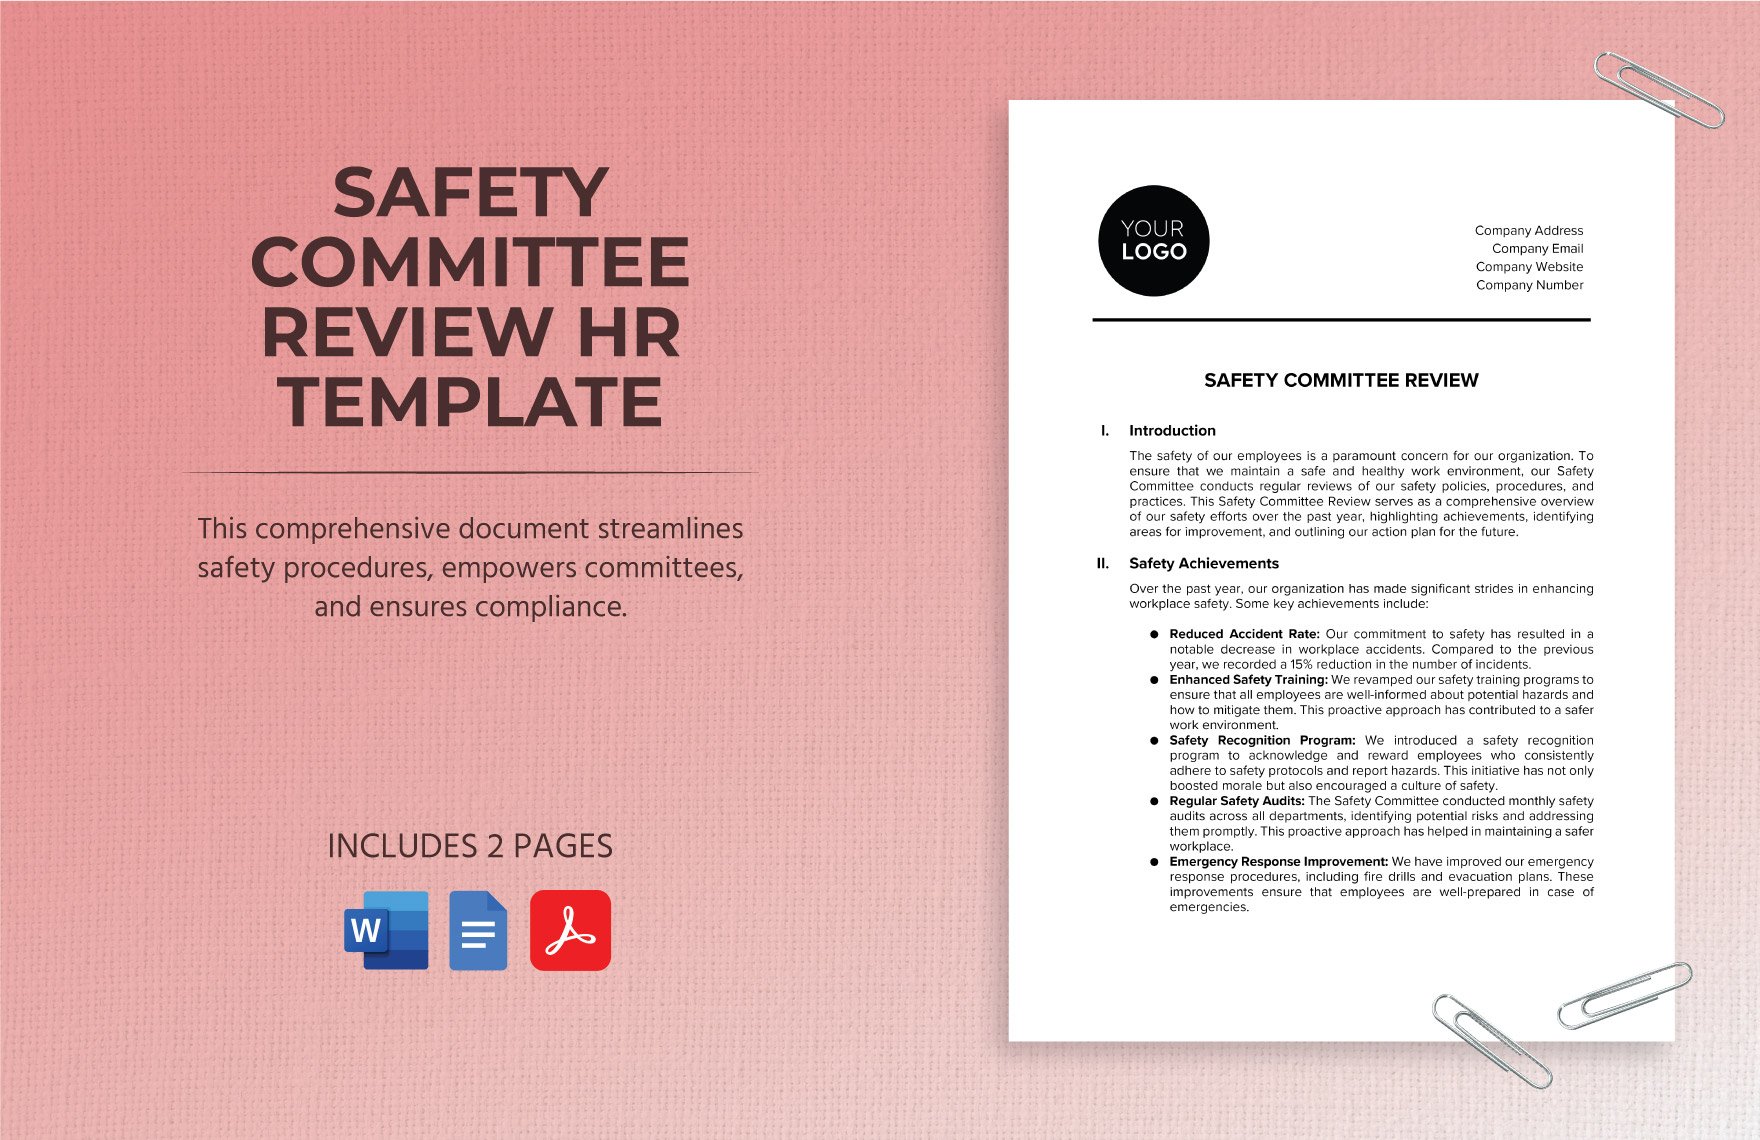 Safety Committee Review HR Template in Word, Google Docs, PDF